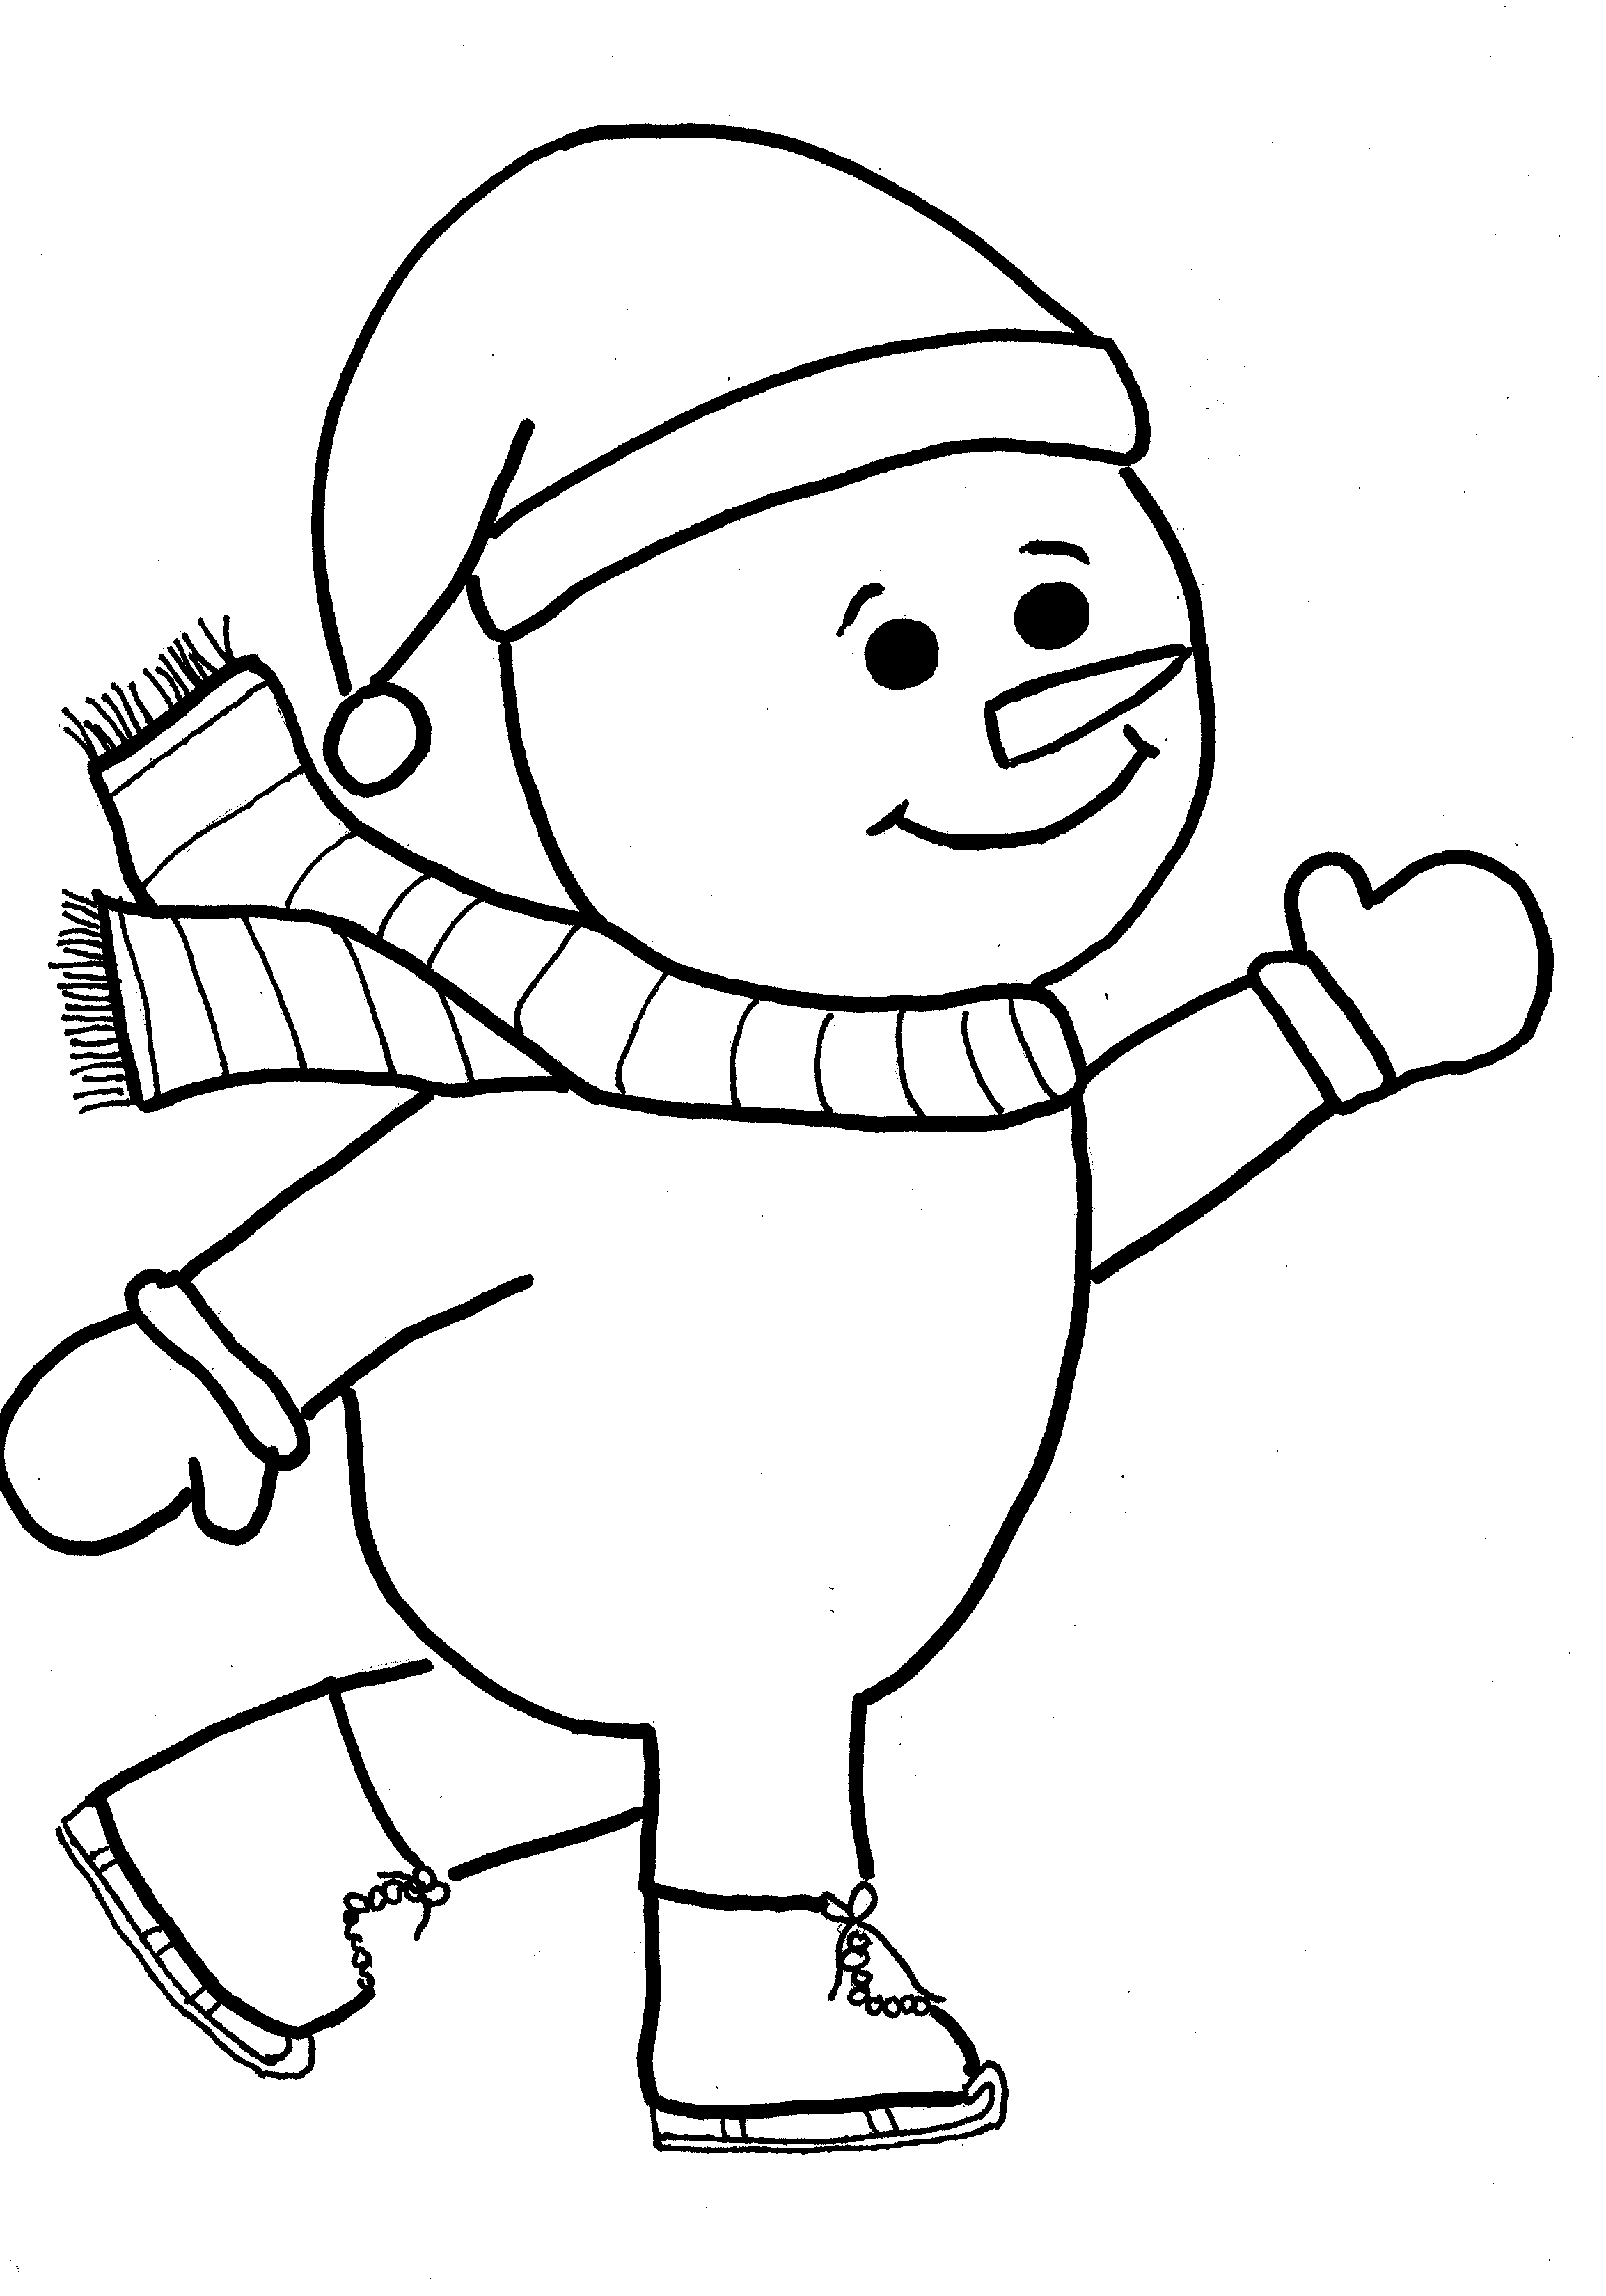 Snowmans Printable Coloring Page